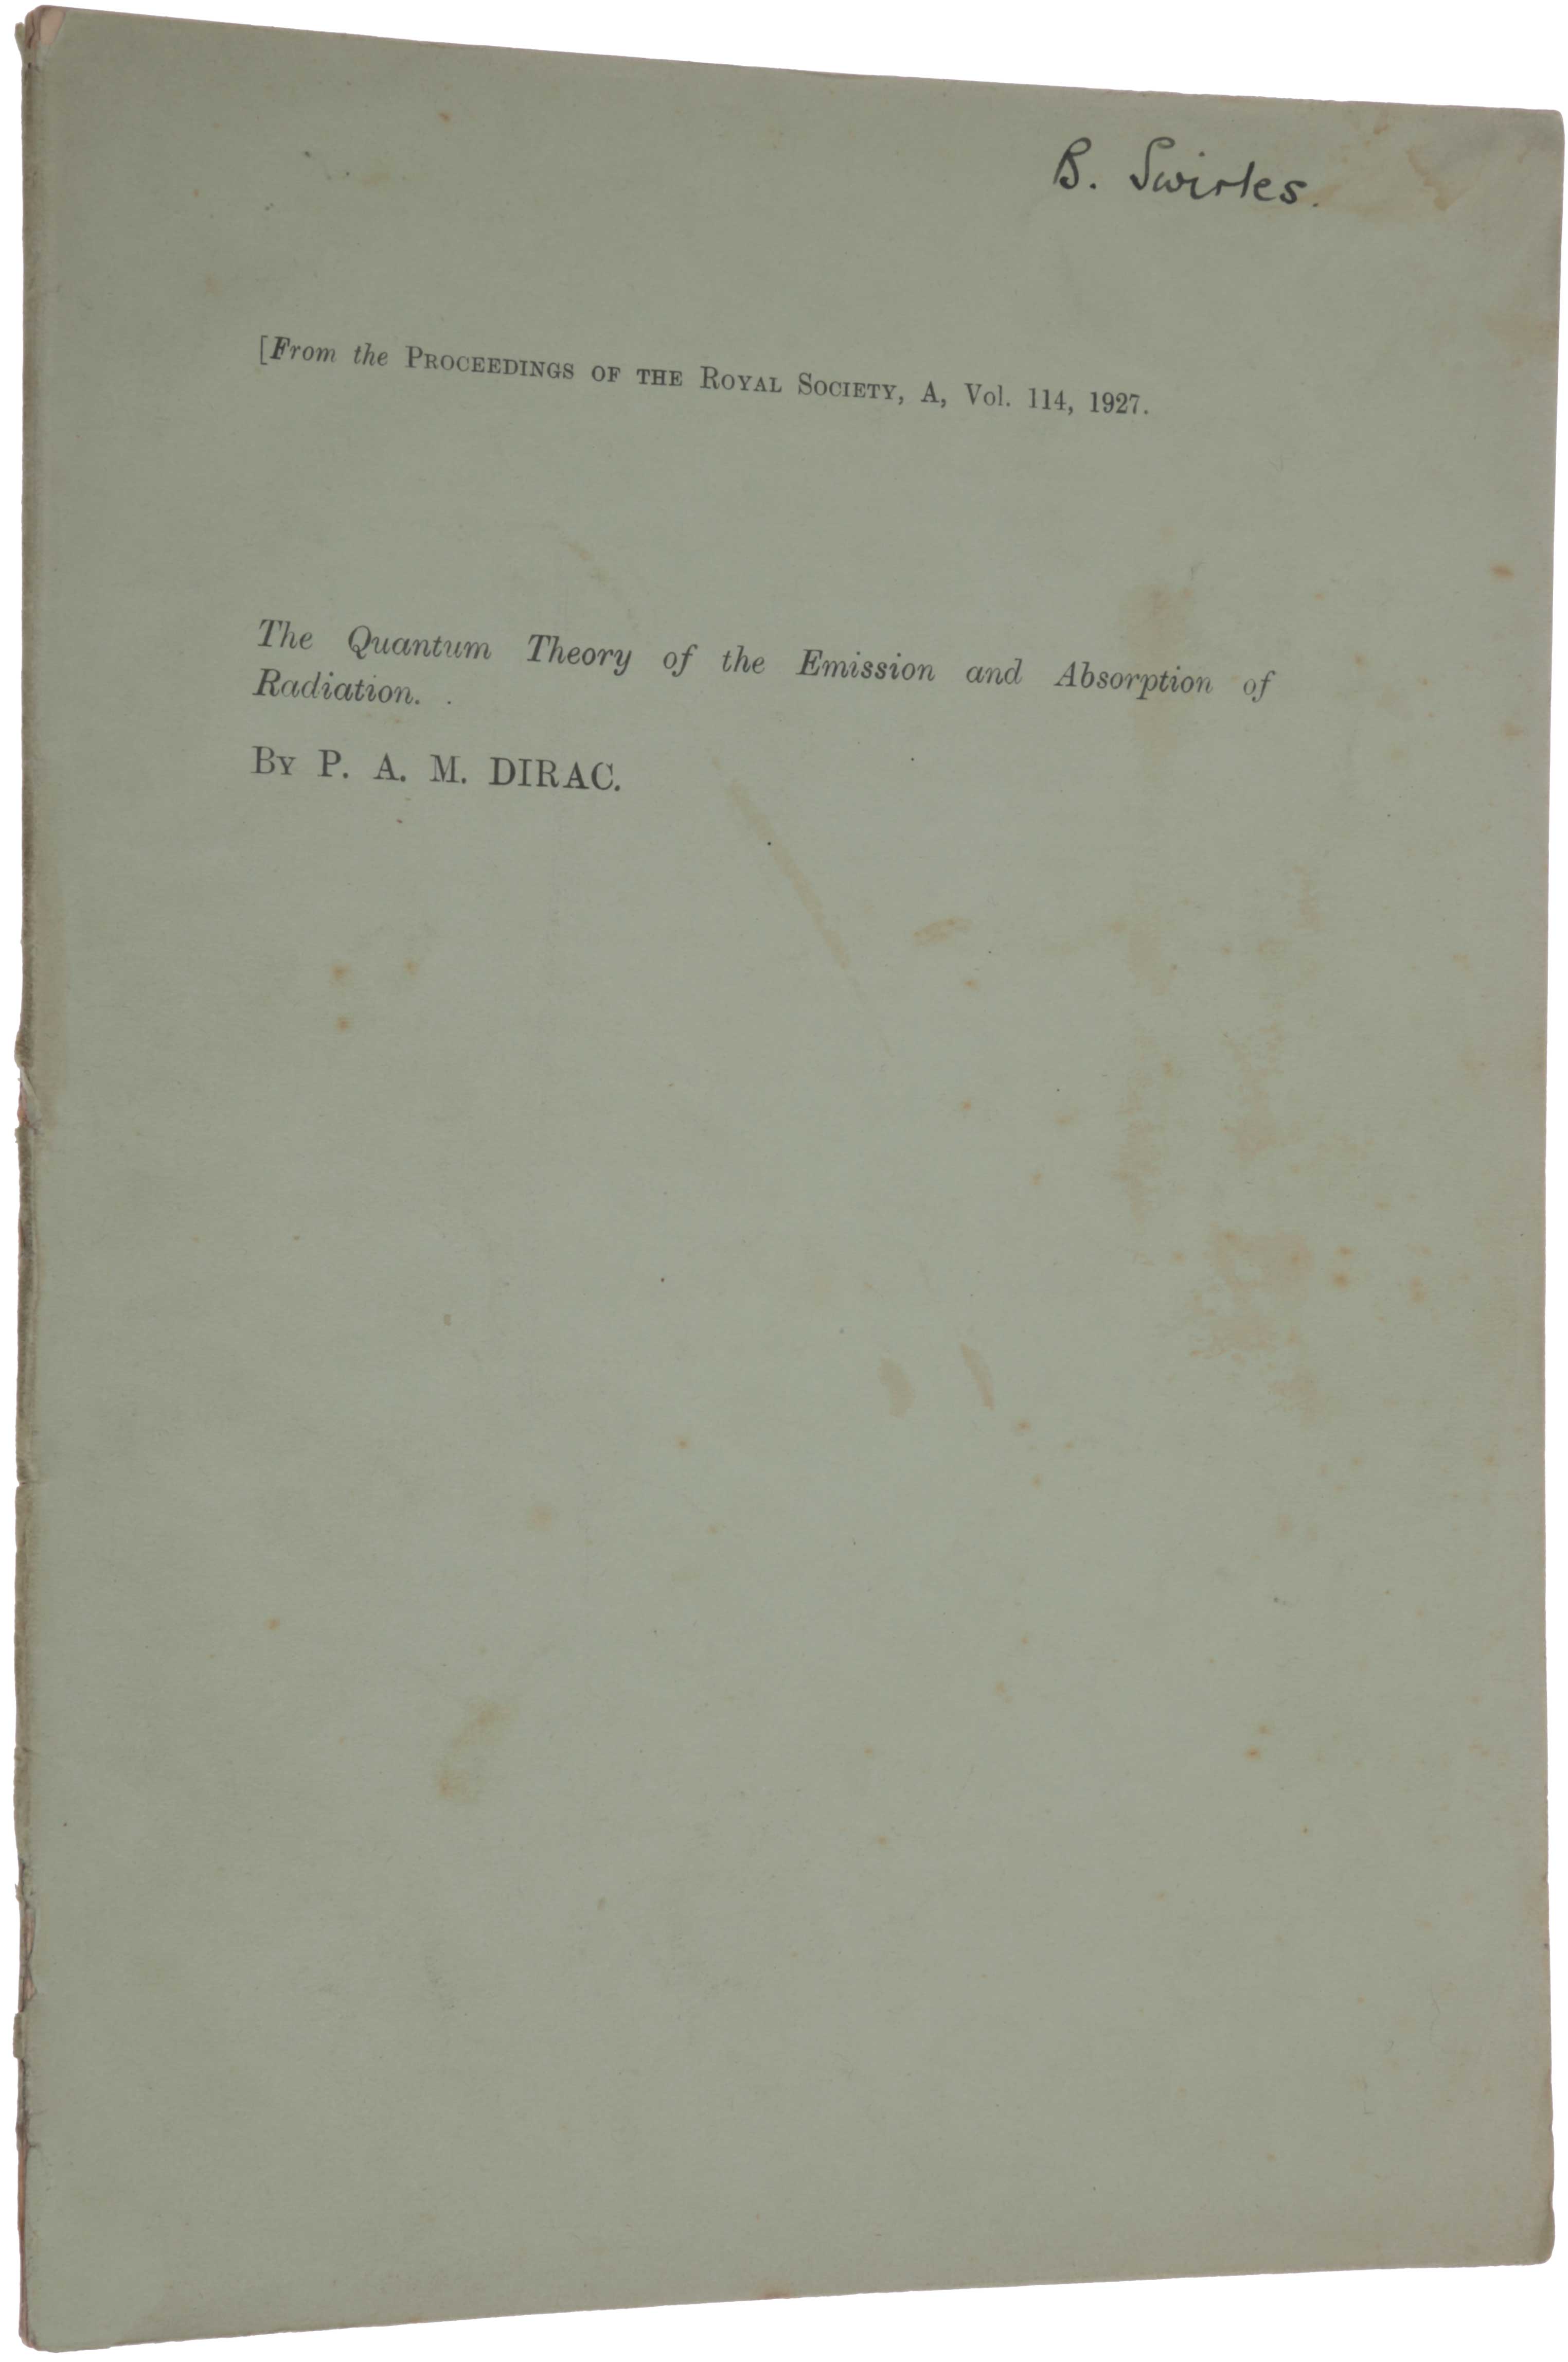 Item #5979 The Quantum Theory of the Emission and Absorption of Radiation. Offprint from Proceedings of the Royal Society A, vol. 114, 1927. Paul Adrien Maurice DIRAC.